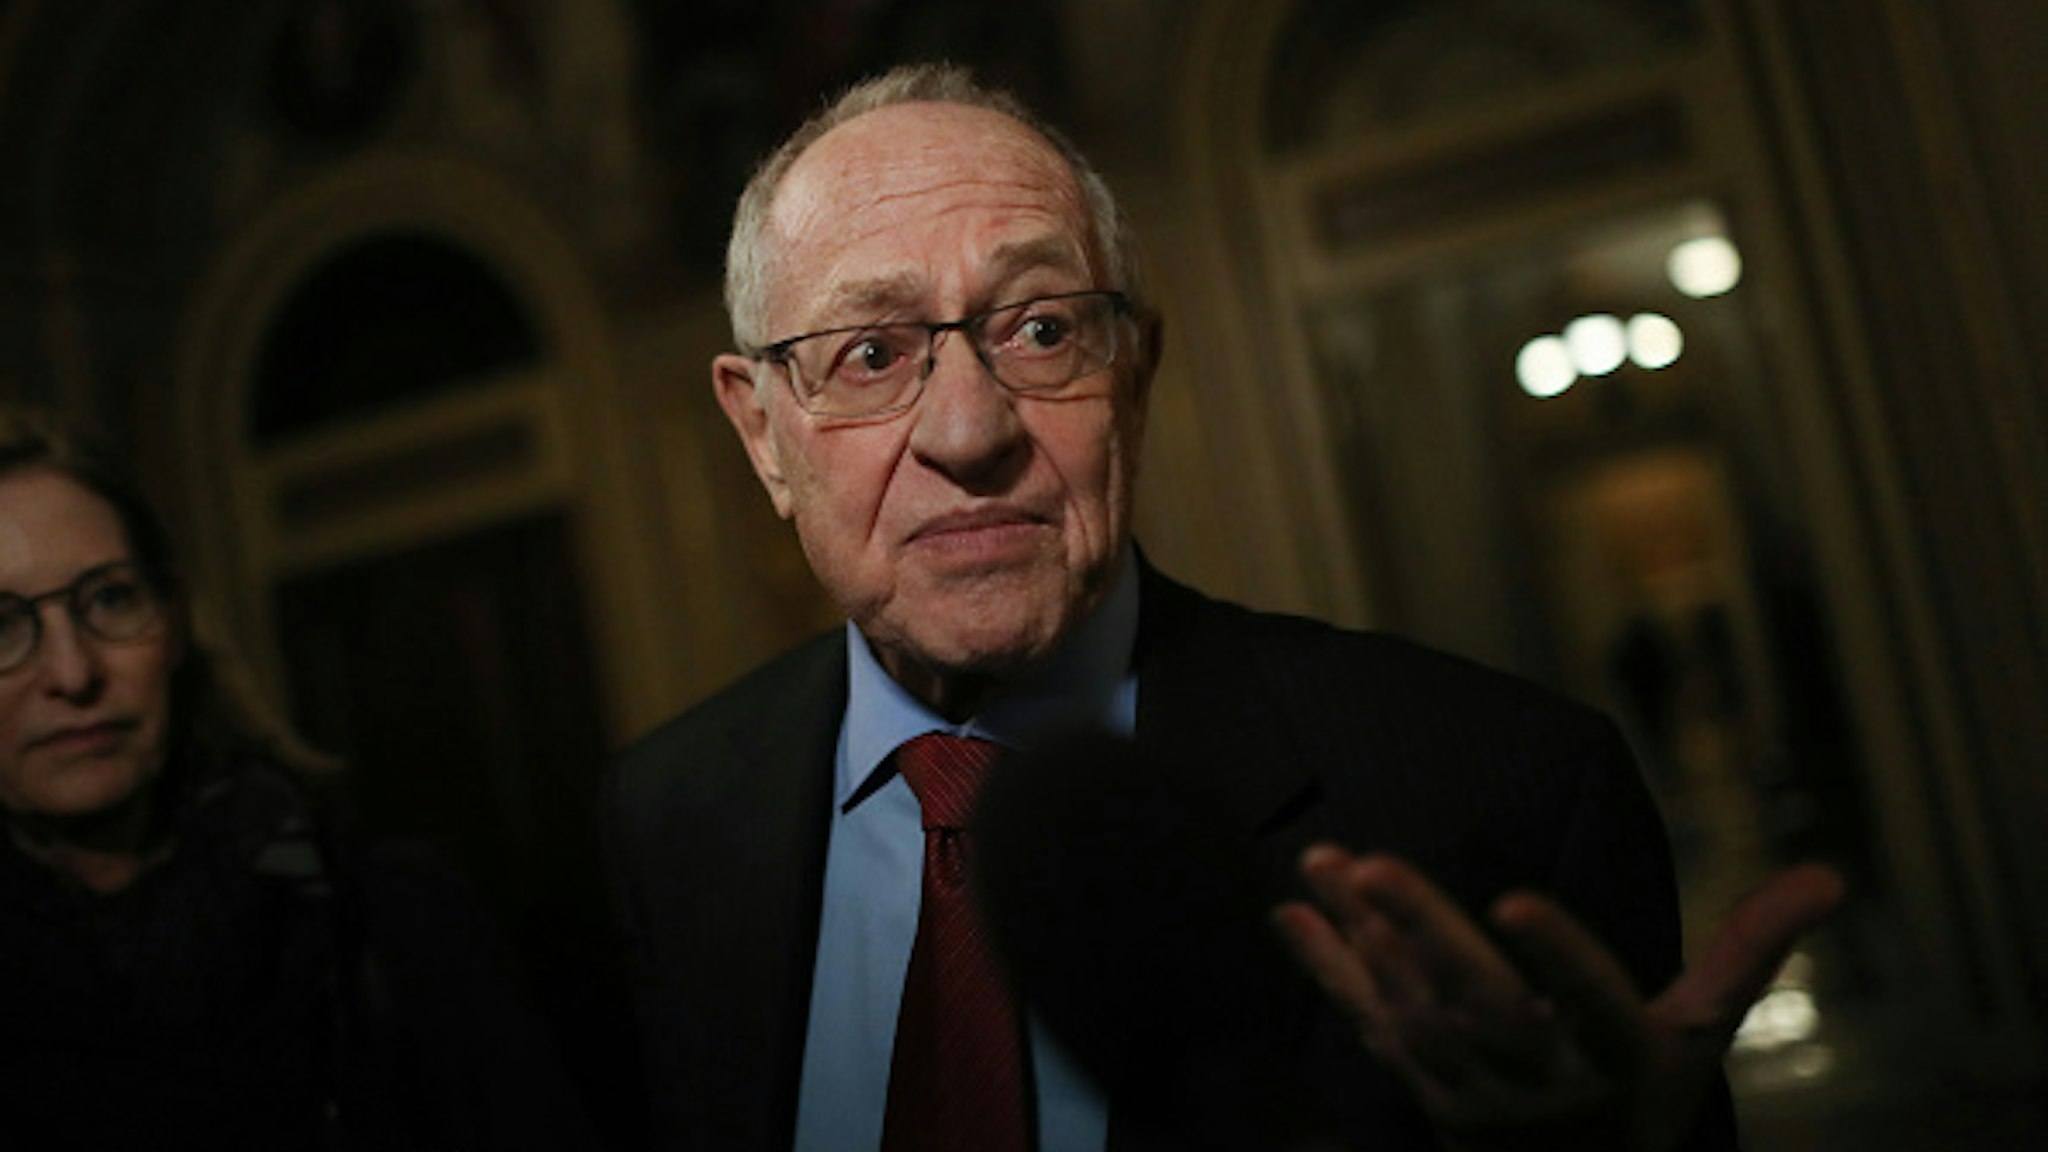 WASHINGTON, DC - JANUARY 29: Attorney Alan Dershowitz, a member of President Donald Trump's legal team, speaks to the press in the Senate Reception Room during the Senate impeachment trial at the U.S. Capitol on January 29, 2020 in Washington, DC. Wednesday begins the question-and-answer phase of the impeachment trial that will last up to 16 hours over the next two days.